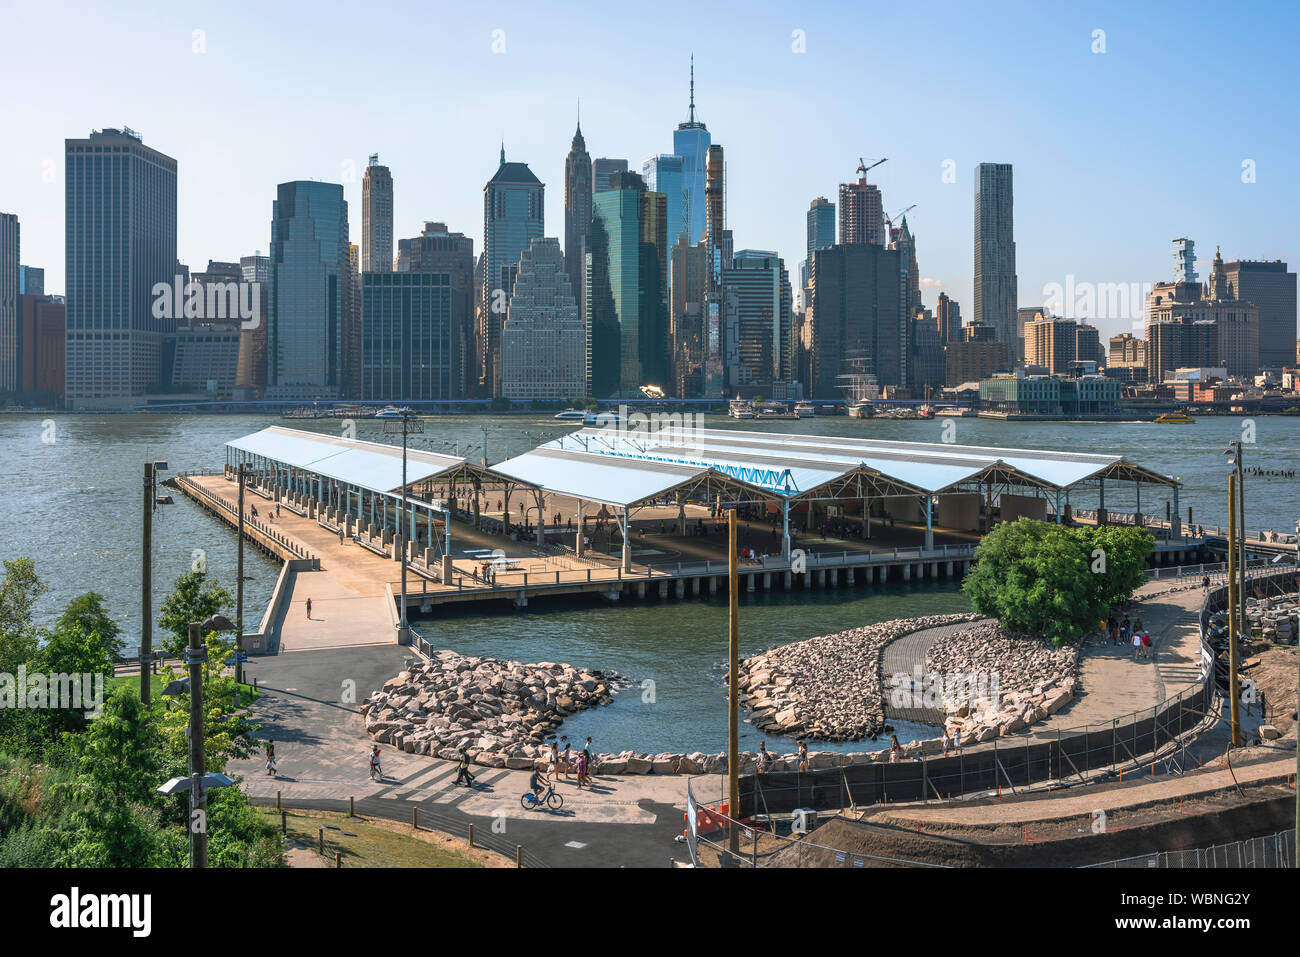 Pier 2 Brooklyn, view in summer of Pier 2 along the East River waterfront in Brooklyn, New York City, USA Stock Photo